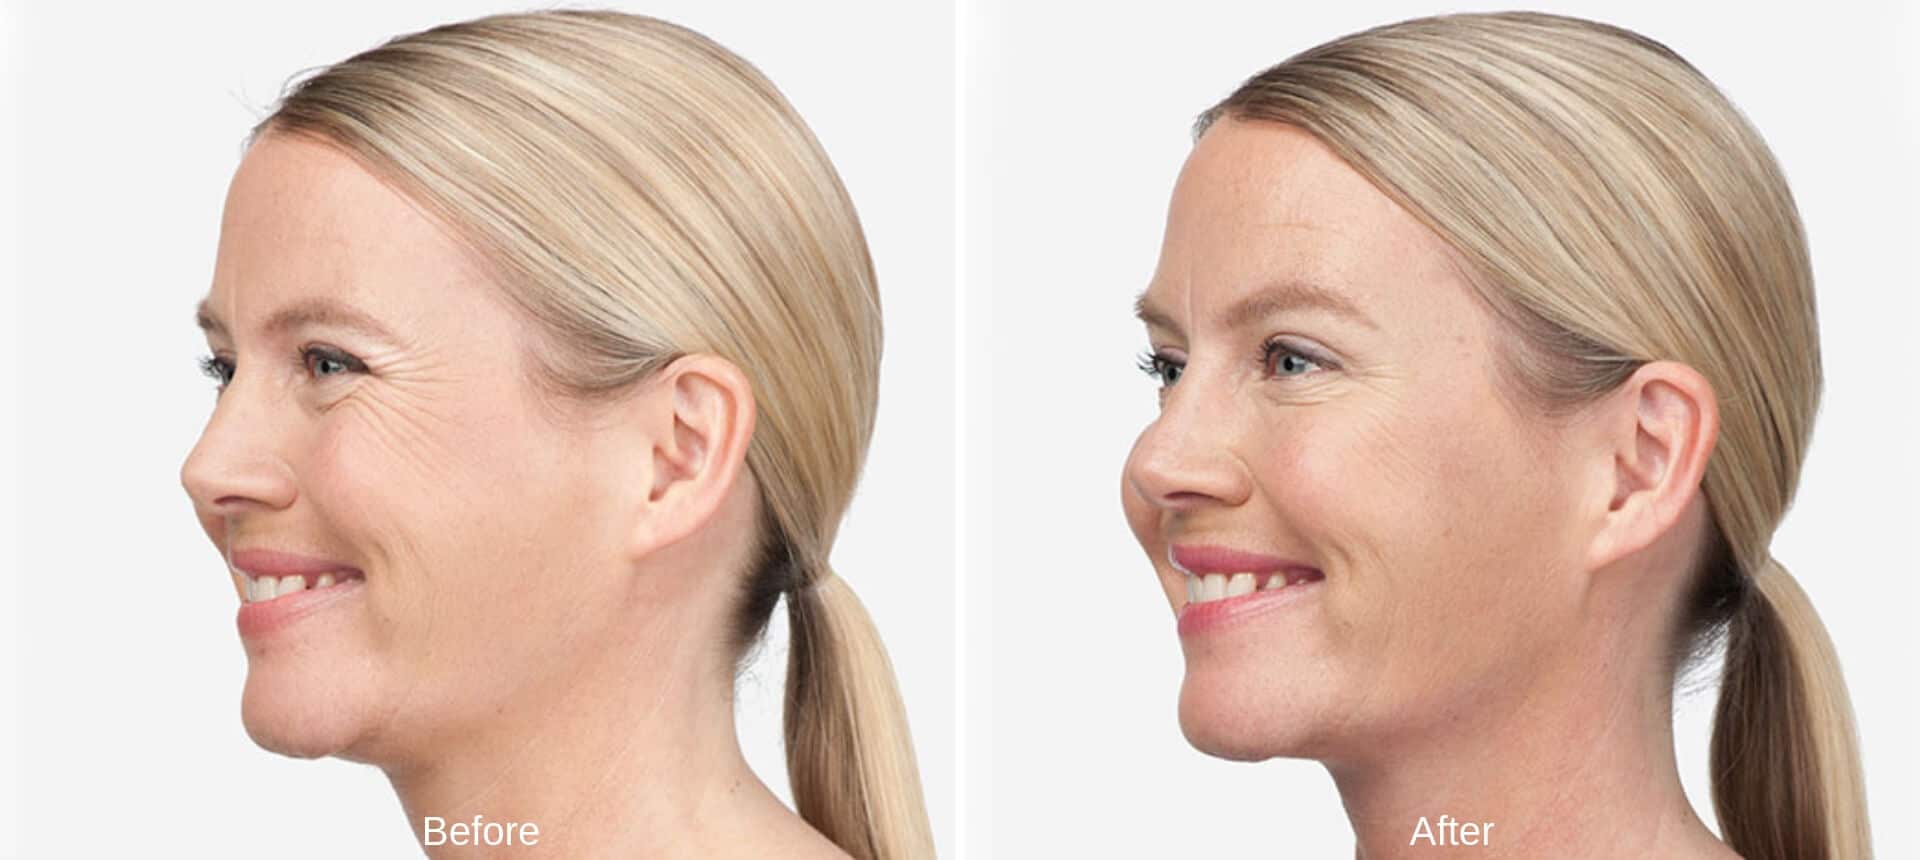 Improve the Lower Face